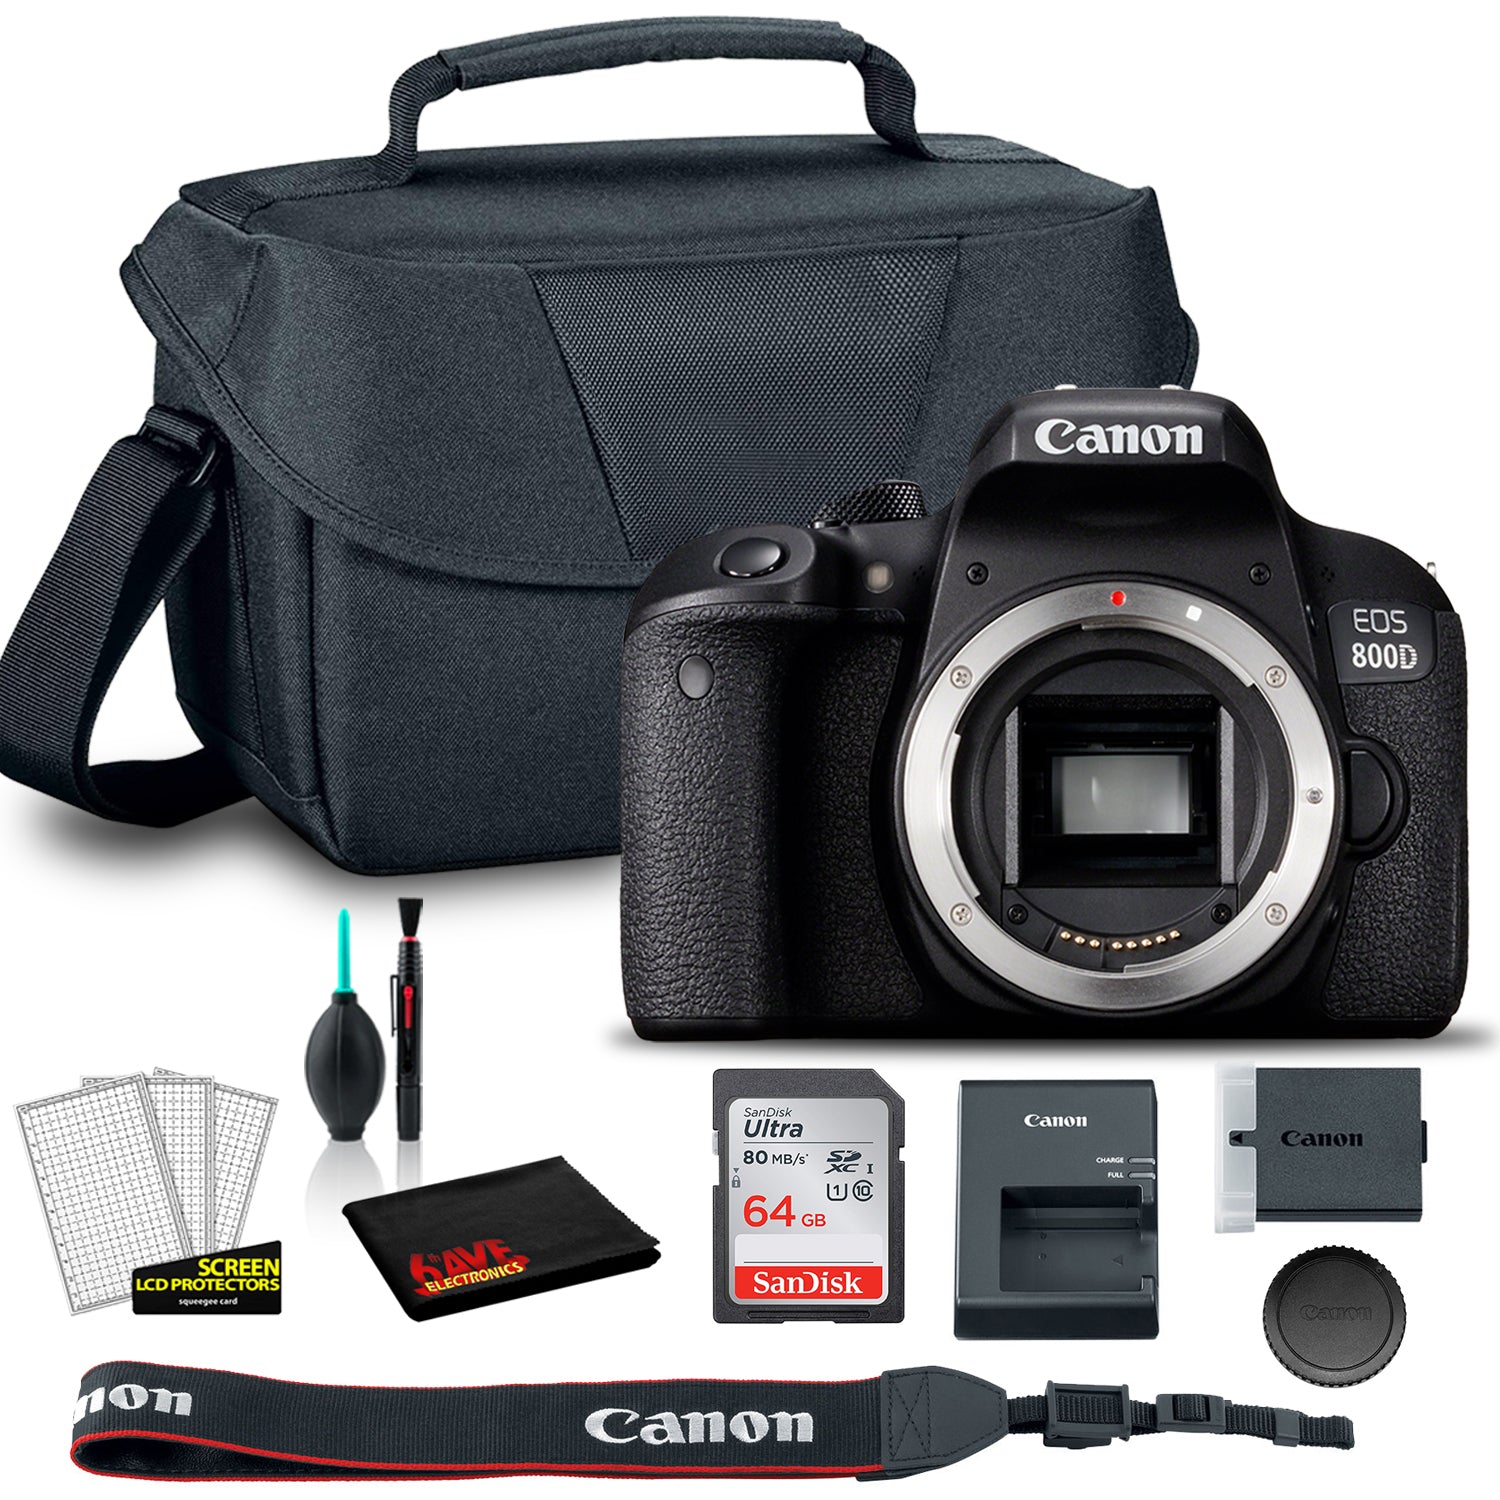 Canon EOS 800D DSLR Camera (Body Only) (1894C001AA) +  EOS Bag +  Sandisk Ultra 64GB Card + Clean and Care Set (International Model)